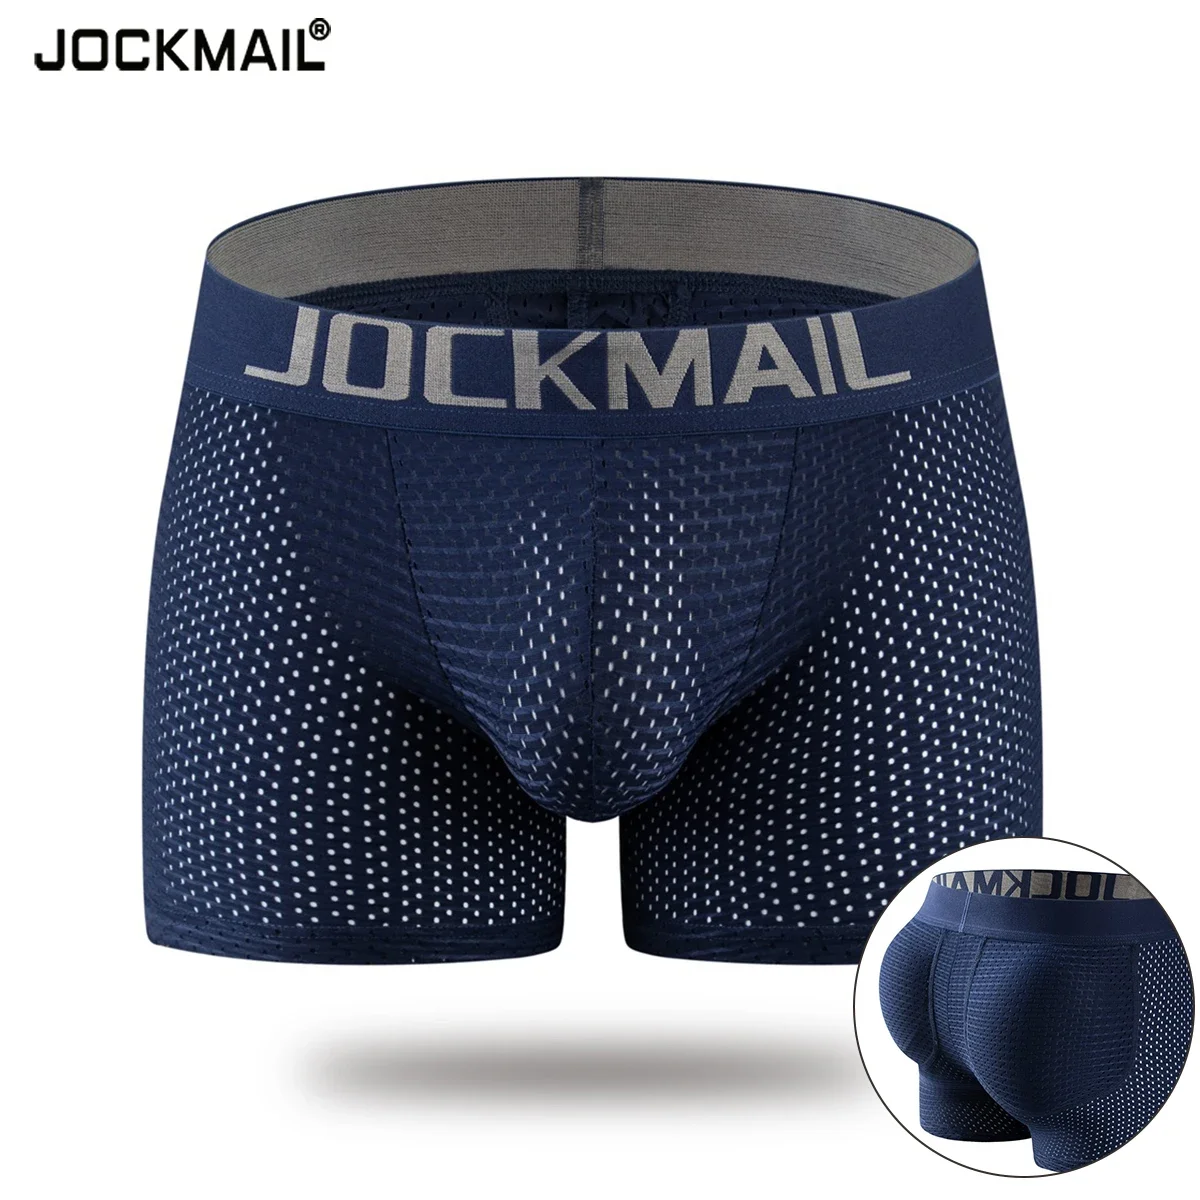 JOCKMAIL Sexy Underwear Men's Boxer Shorts Mesh U Pouch Sexy Underpants with Hip Pads Cueca Boxer Men Sleep Bottoms Male Trunks mesh lingerie bodysuit solid fishnet lingerie sexy see through underwear negligees ultra thin pajamas garter lenceria intimate